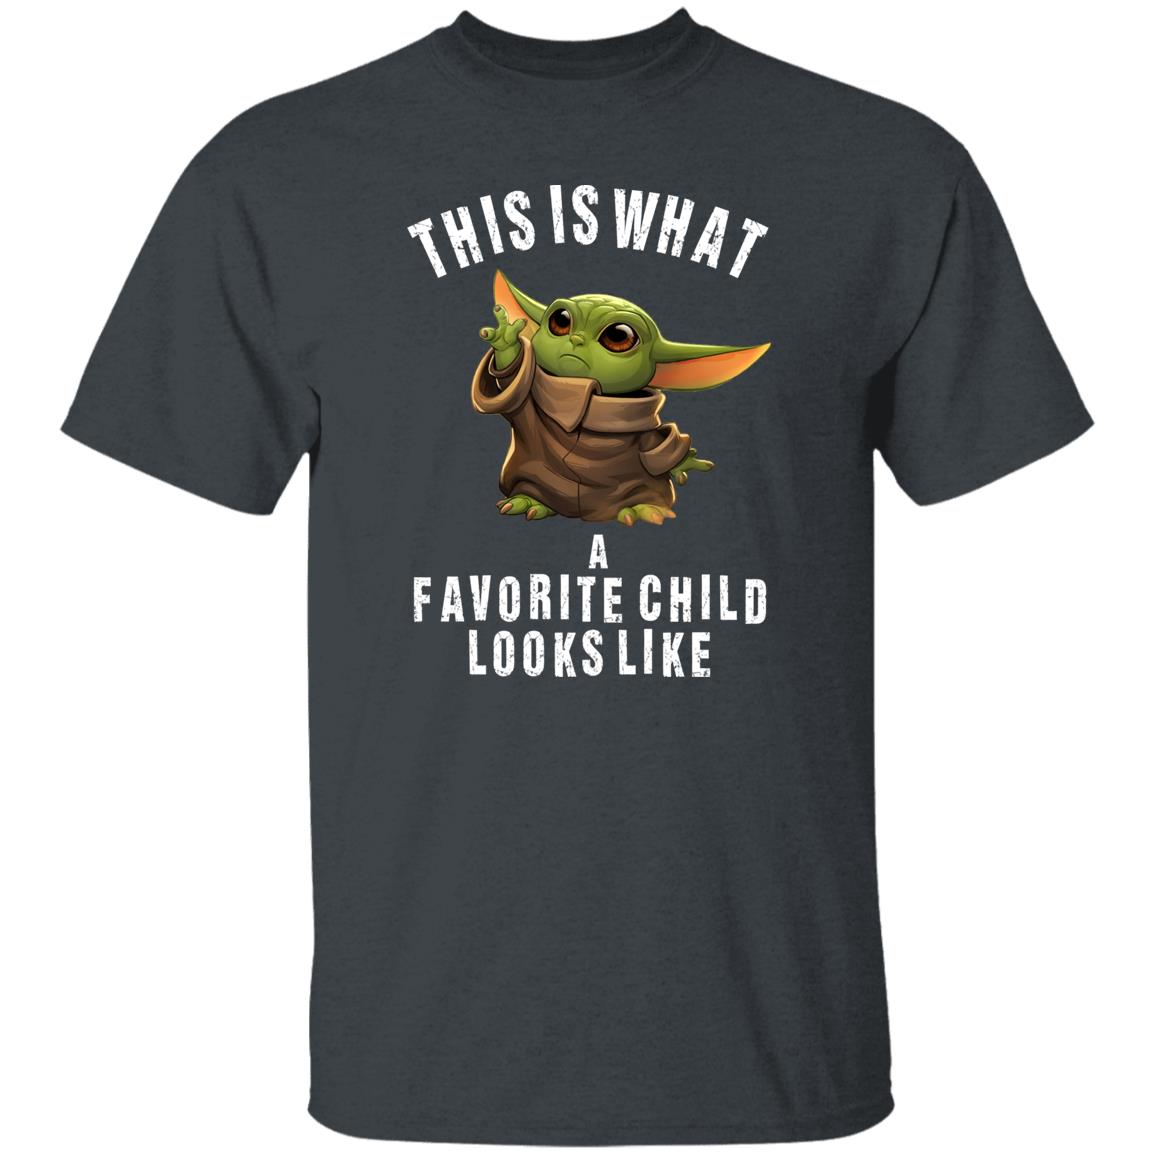 This is What A Favorite Child Looks Like Baby Yoda Shirt